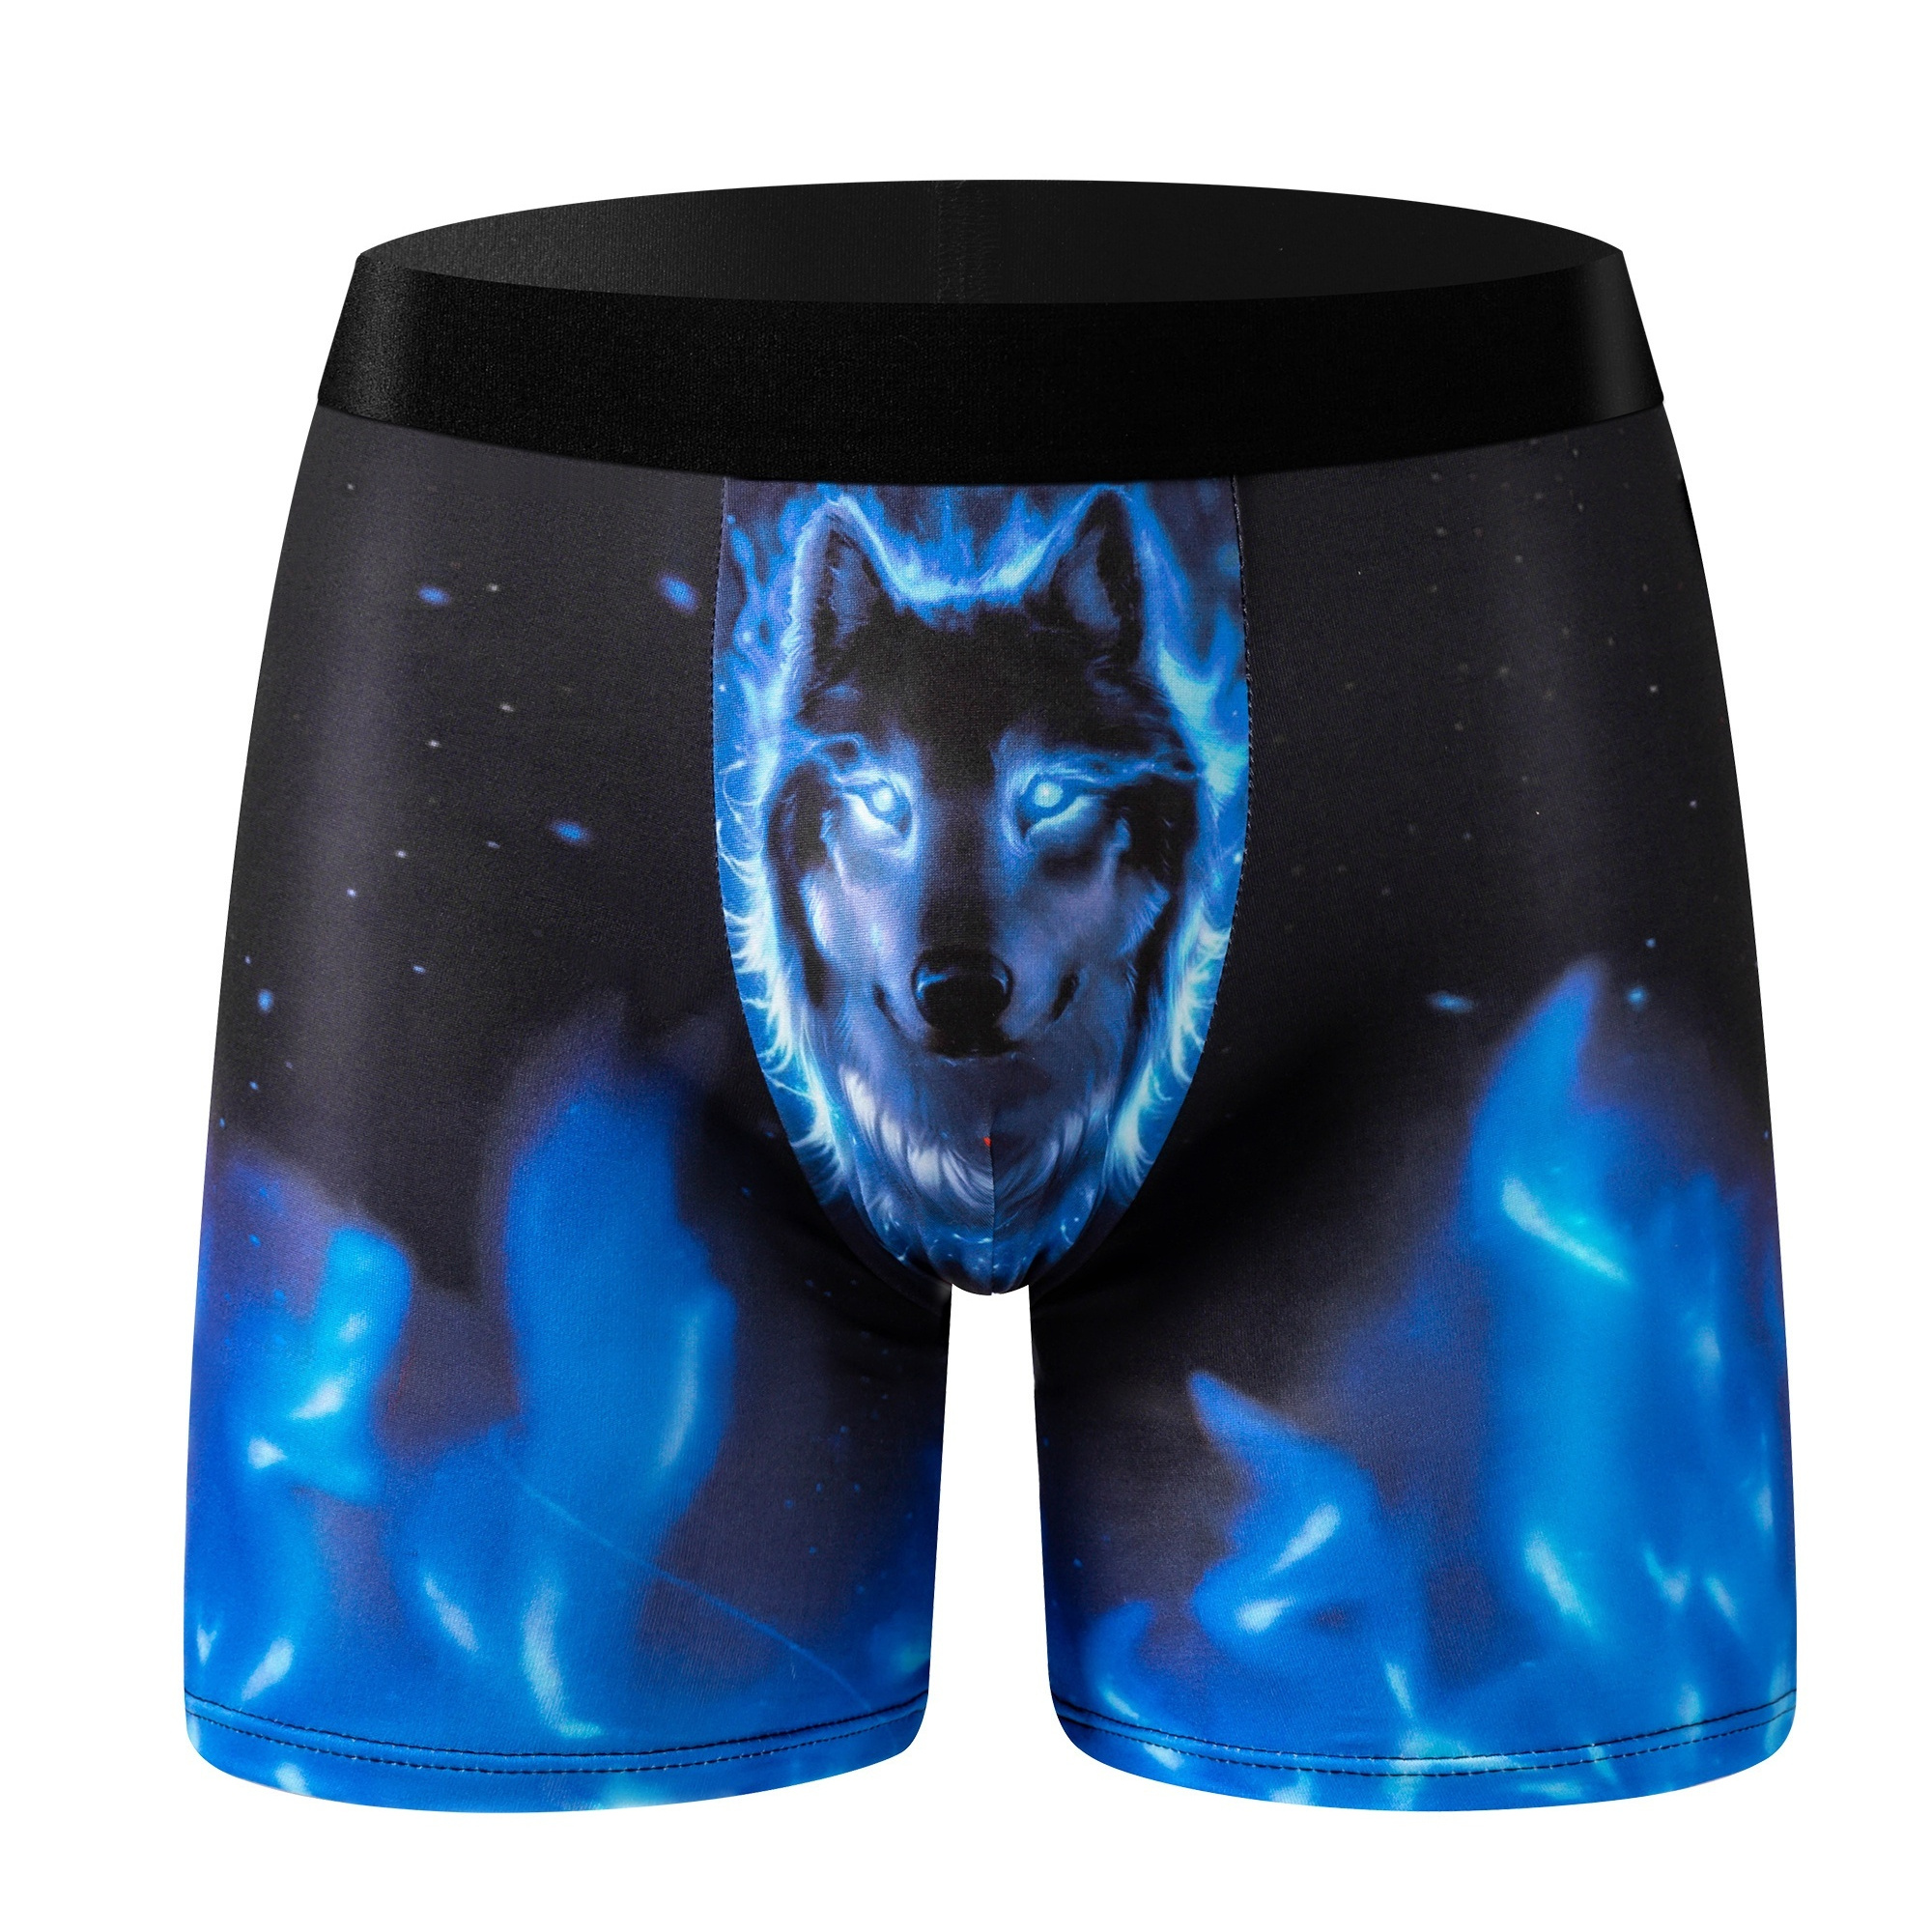 

Blue Flame Wolf Pattern Print Men's Novelty Elastic Boxer Briefs Shorts, Breathable And Comfortable Underwear